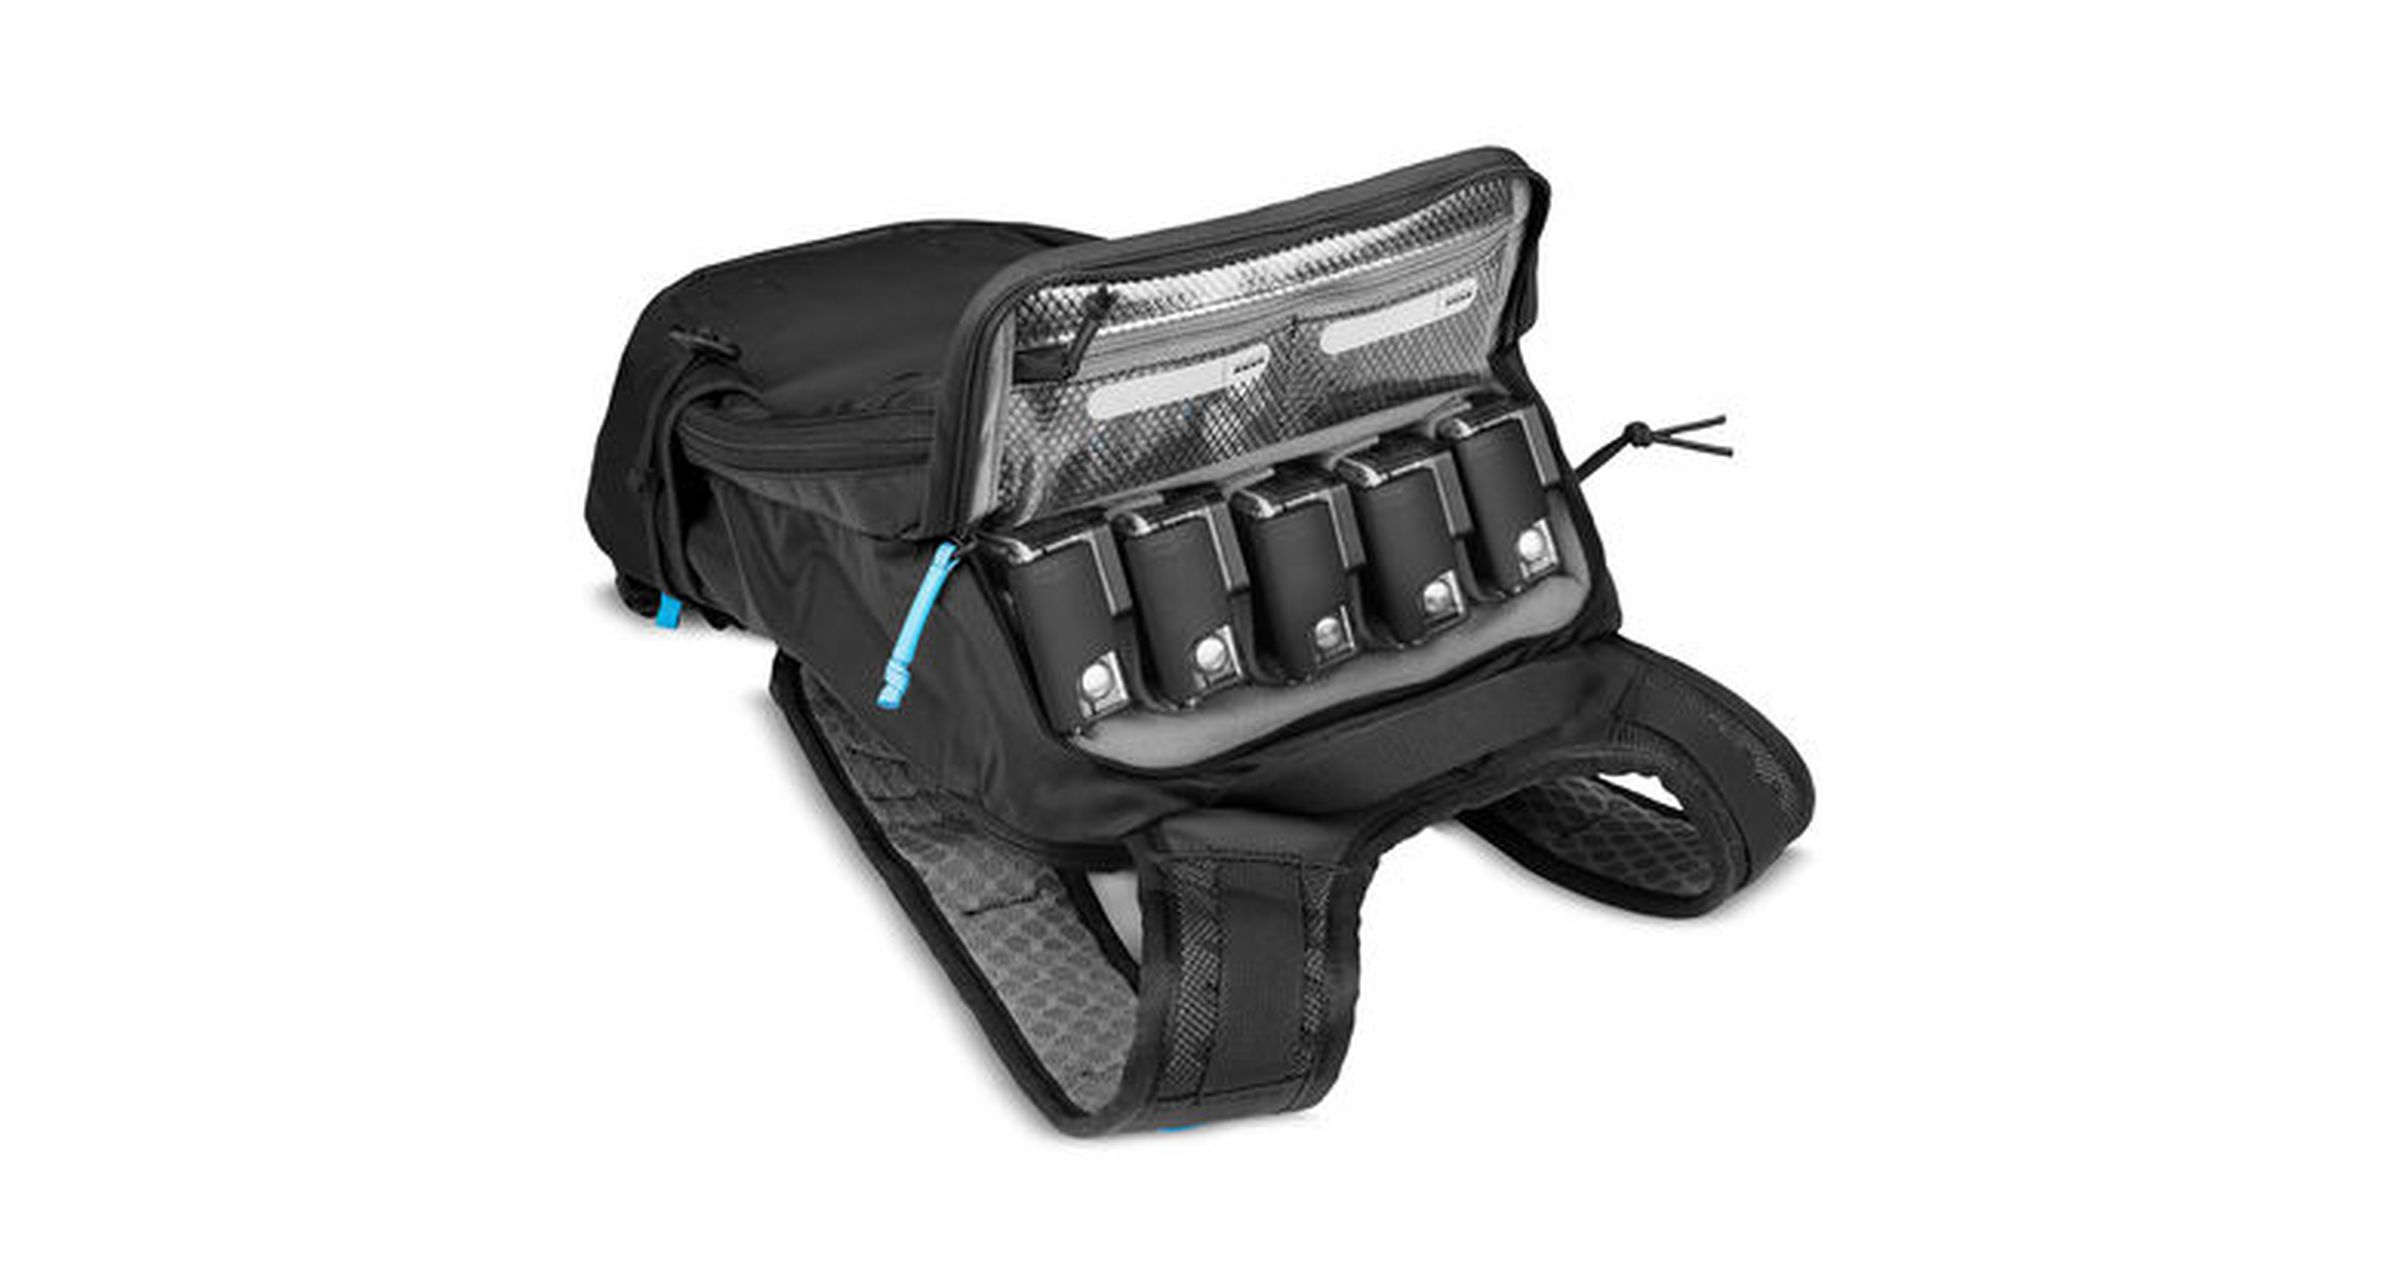 GoPro released a new backpack, the Seeker